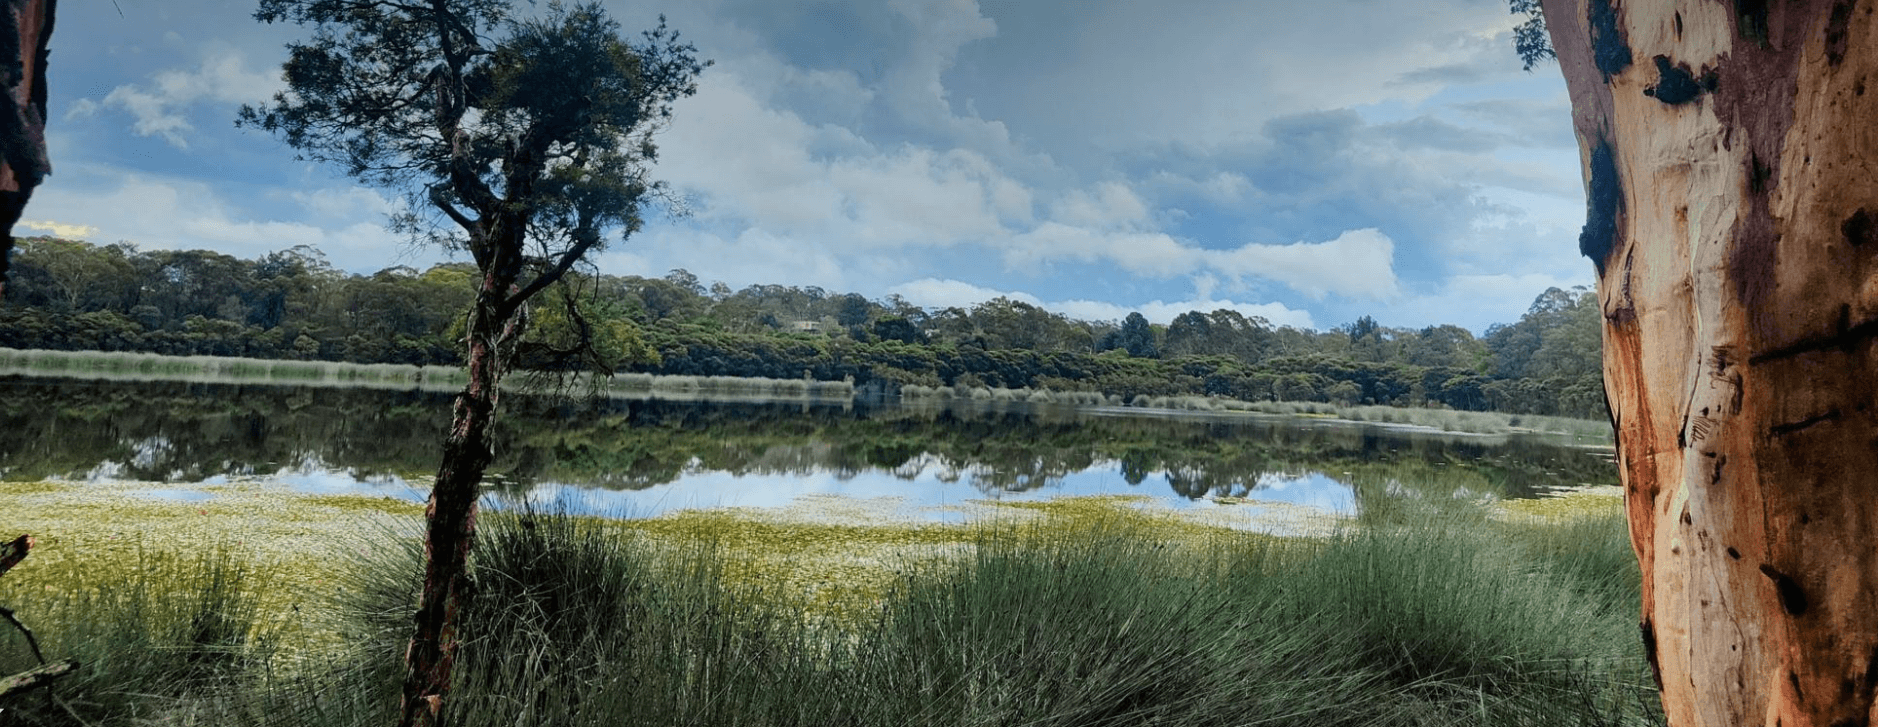 a photo showing Glenbrook Lagoon and surrounding green space